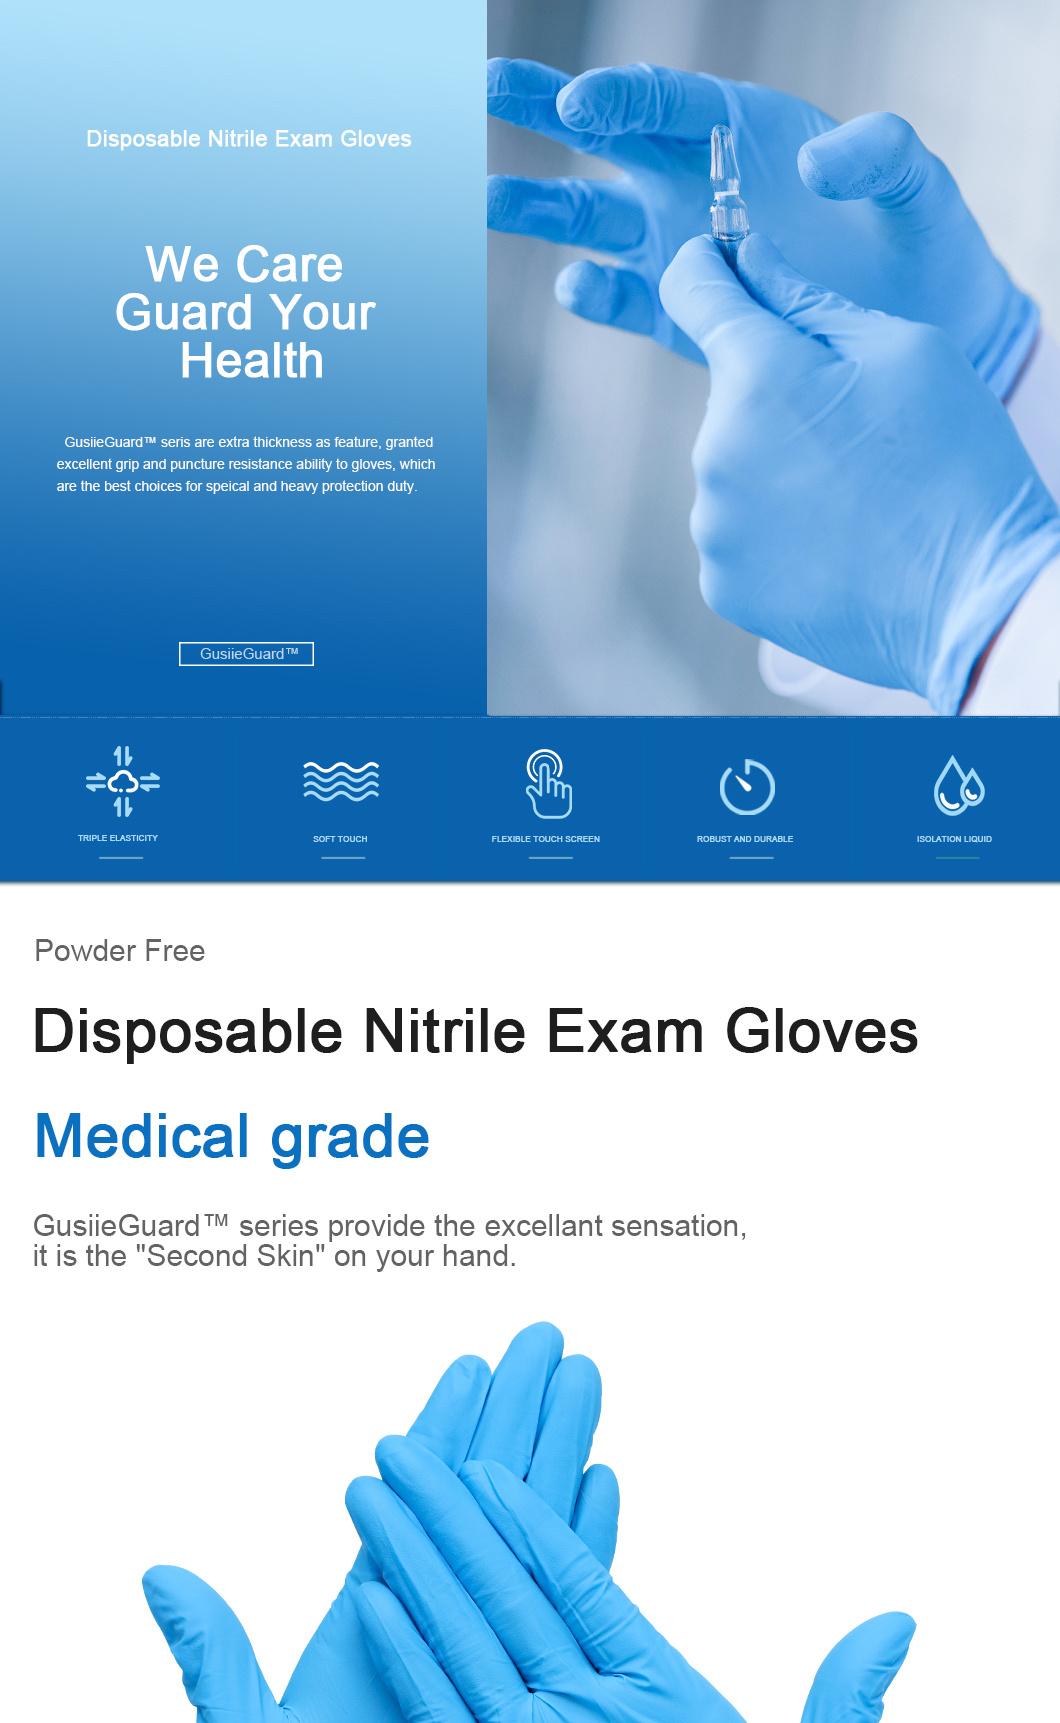 Gusiie Disposable Nitrile Medical for Food Examination Gloves